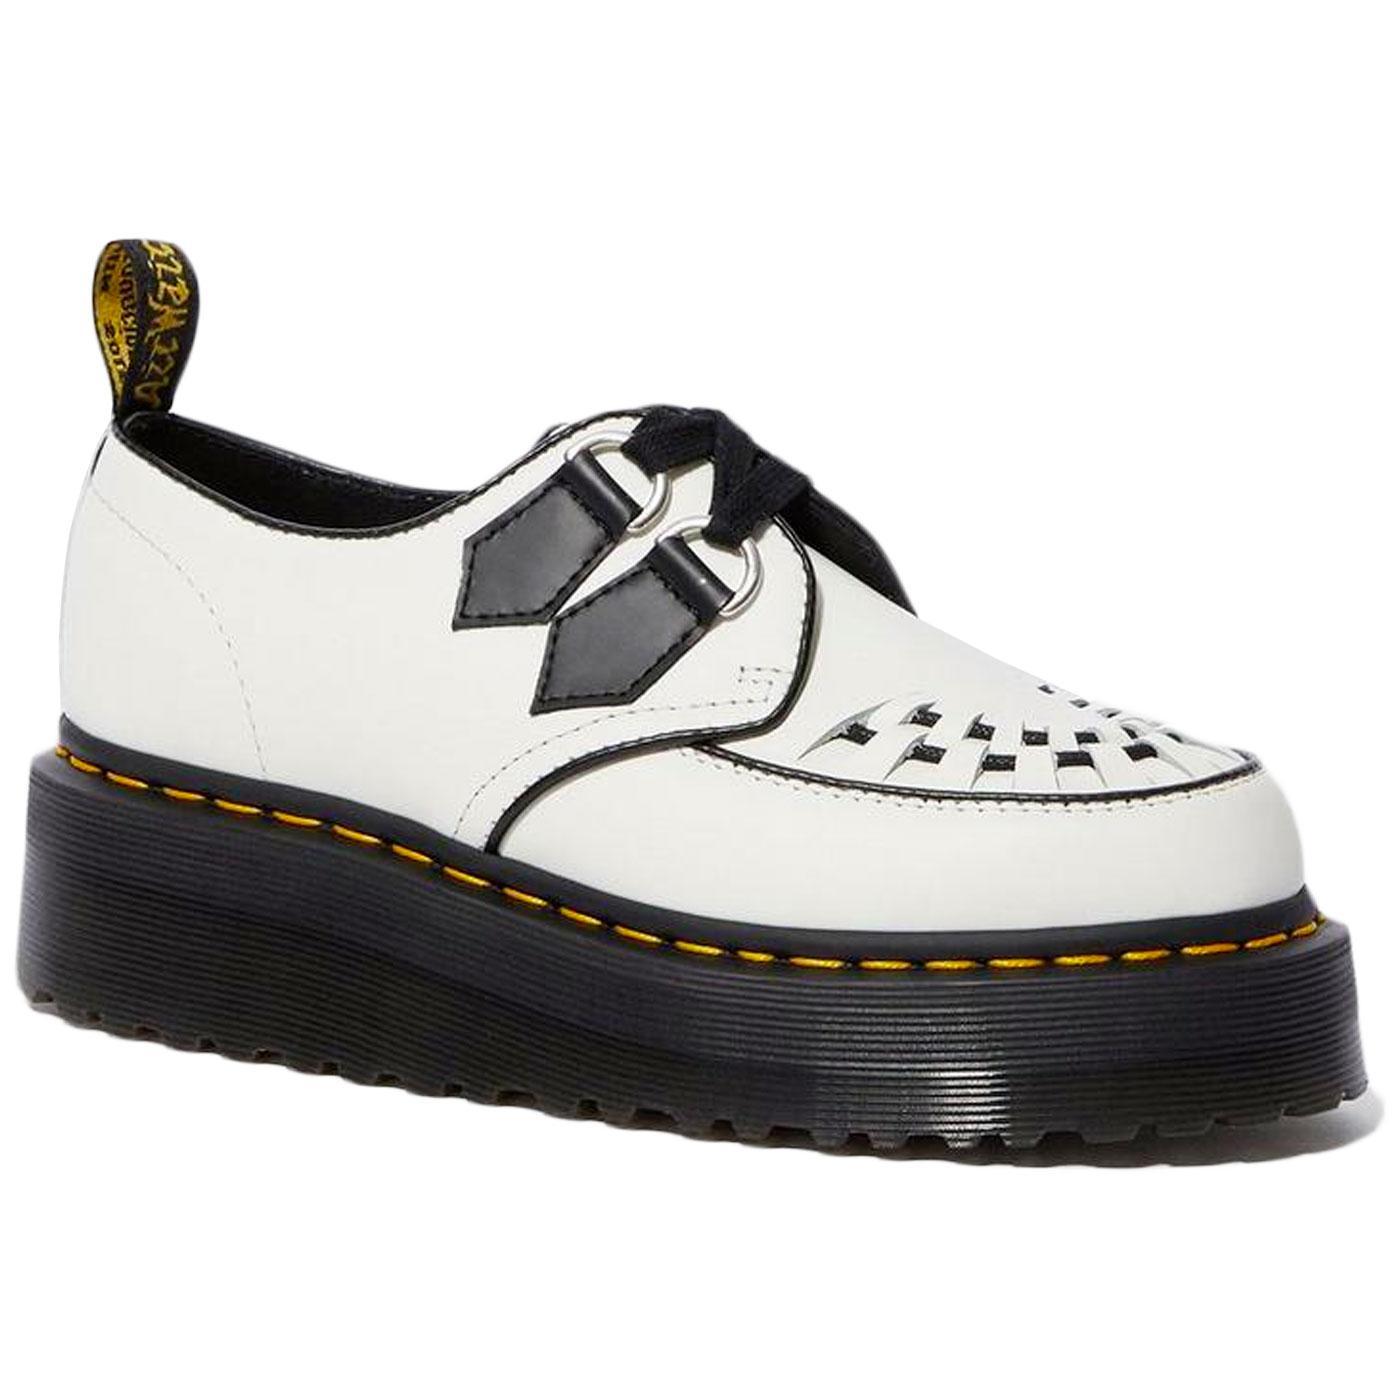 Sidney DR MARTENS Men's Retro Smooth Creepers W